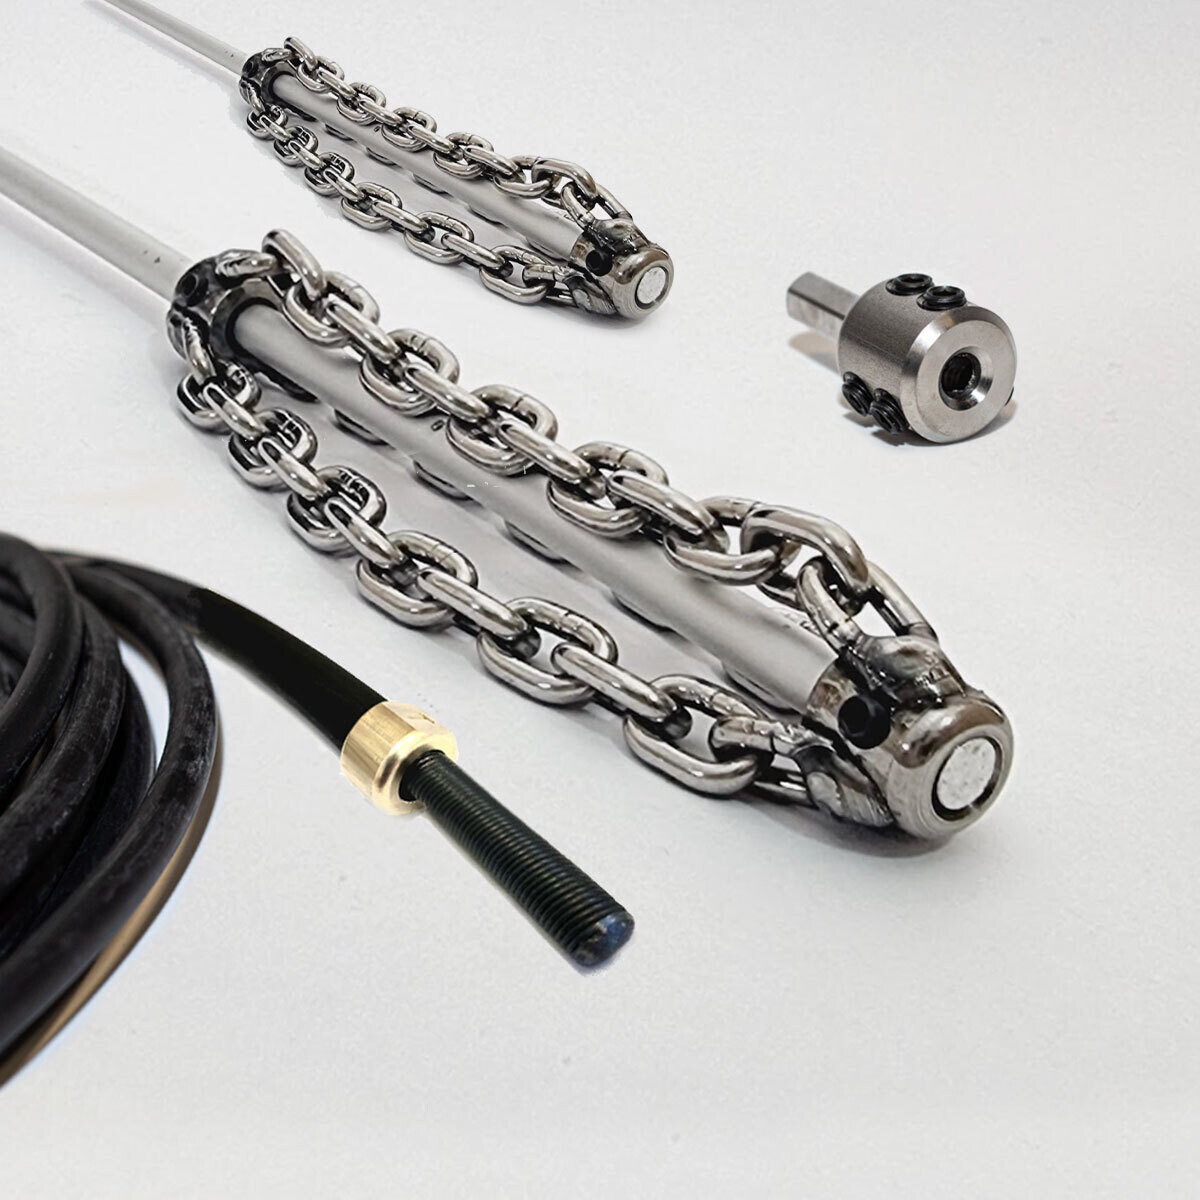 Ridgid seesnake and cyclone chains for pipe clearing, can be used in vitrified clay pipes.